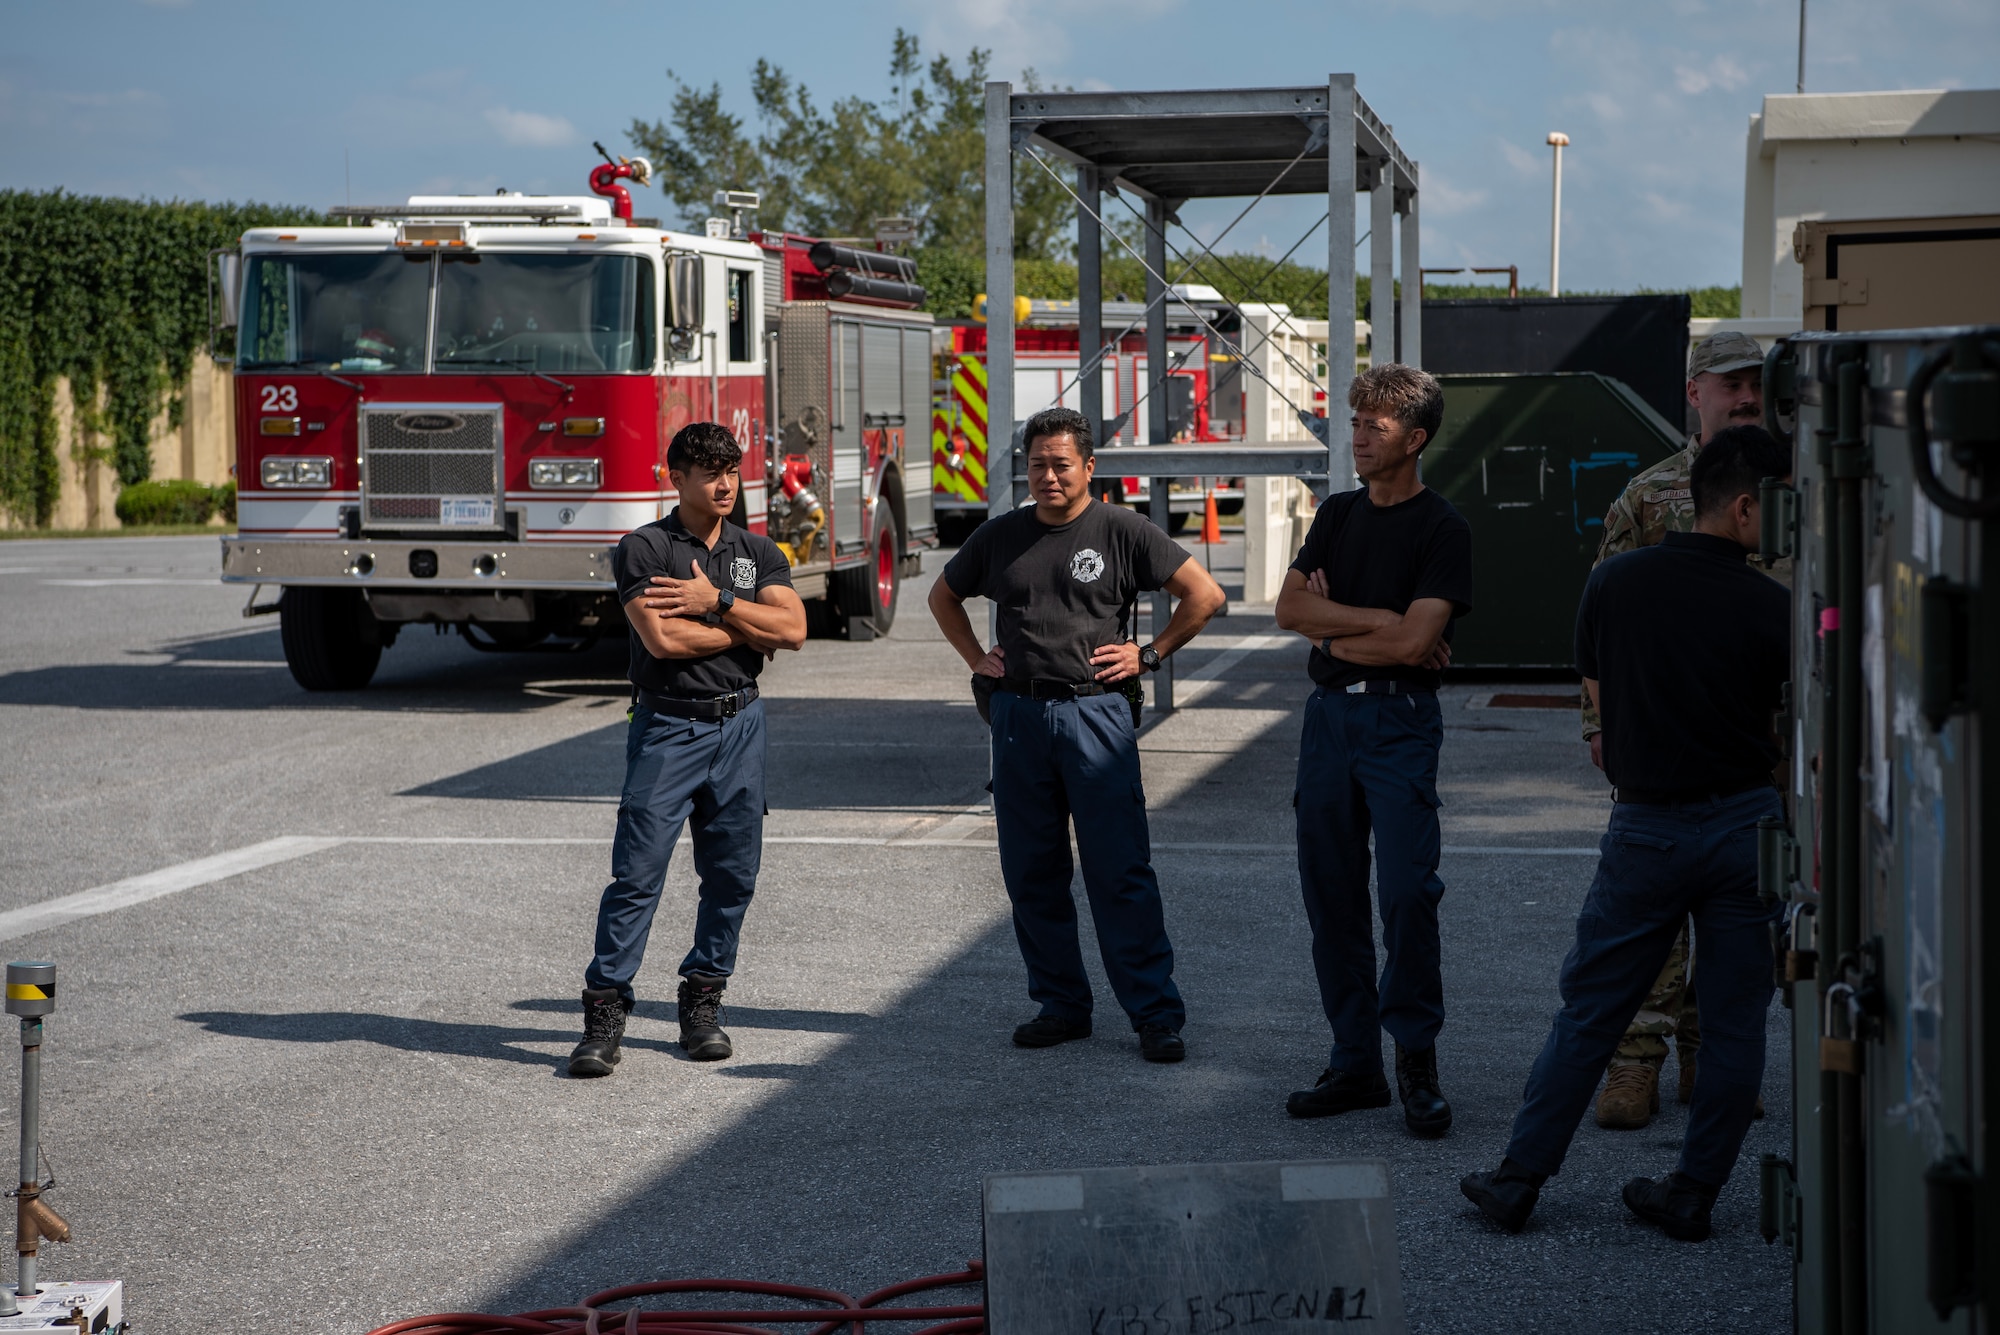 Fire fighters observe demonstration in front of firetrucks.